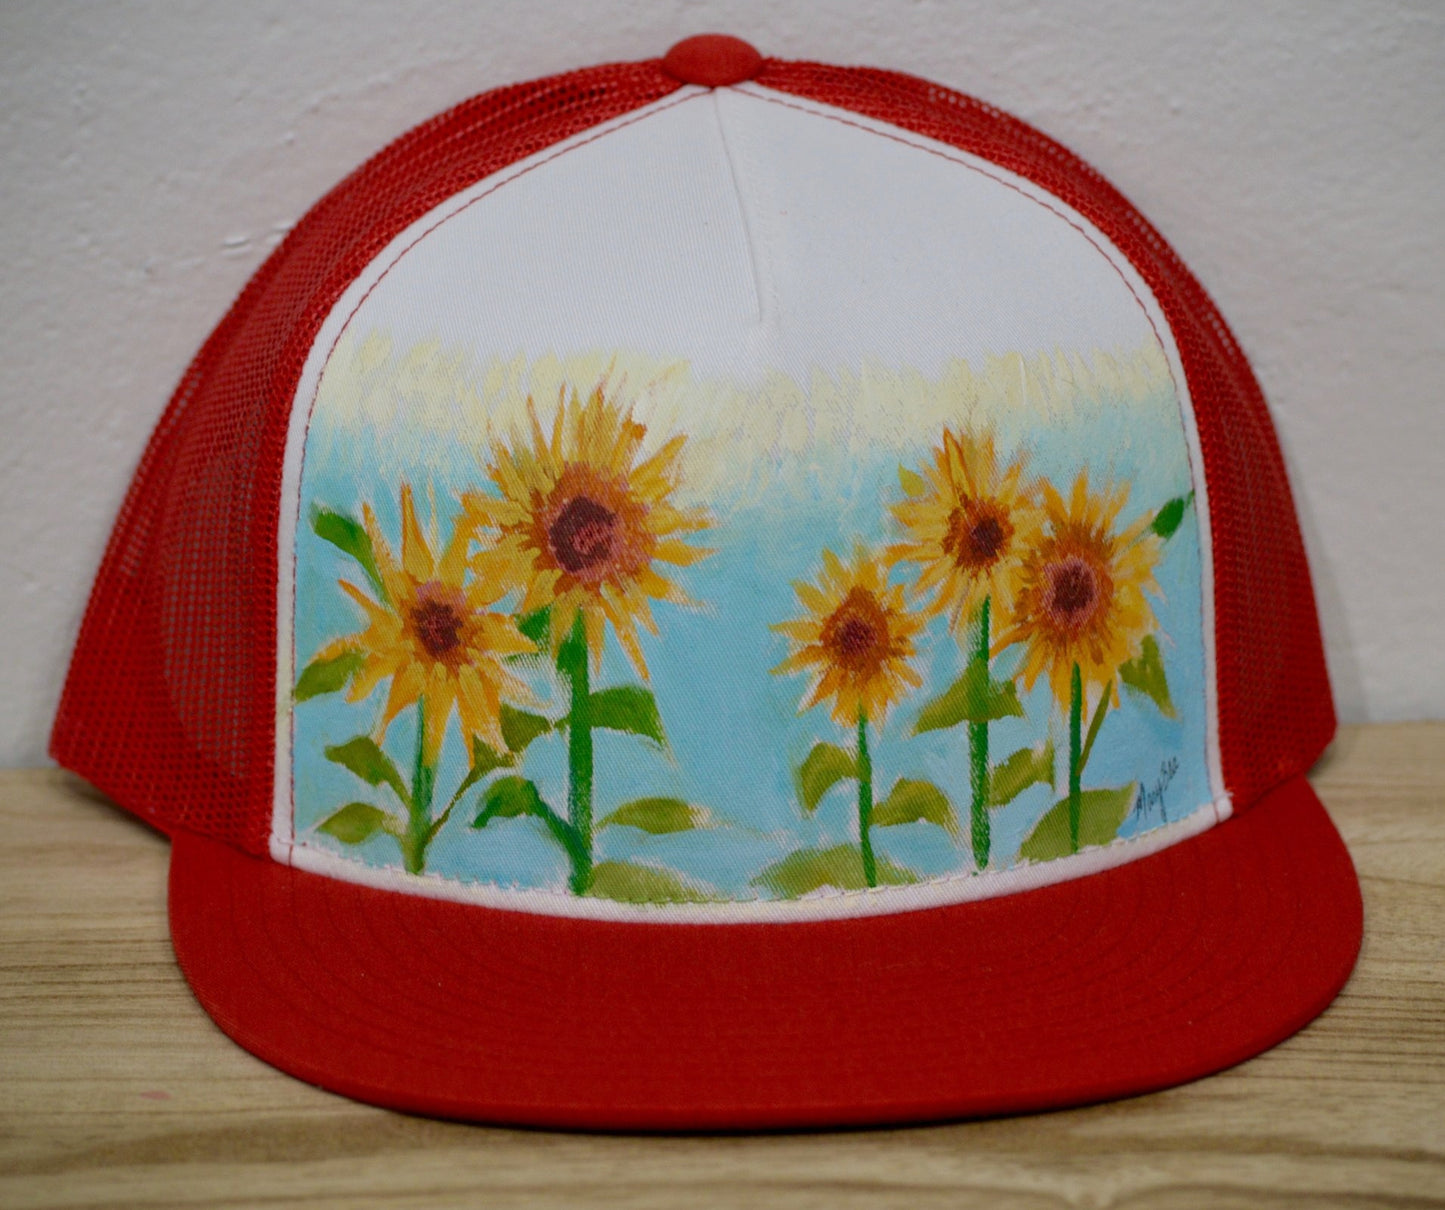 "Sunflowers" Hand Painted on Red Snapback Trucker Hat